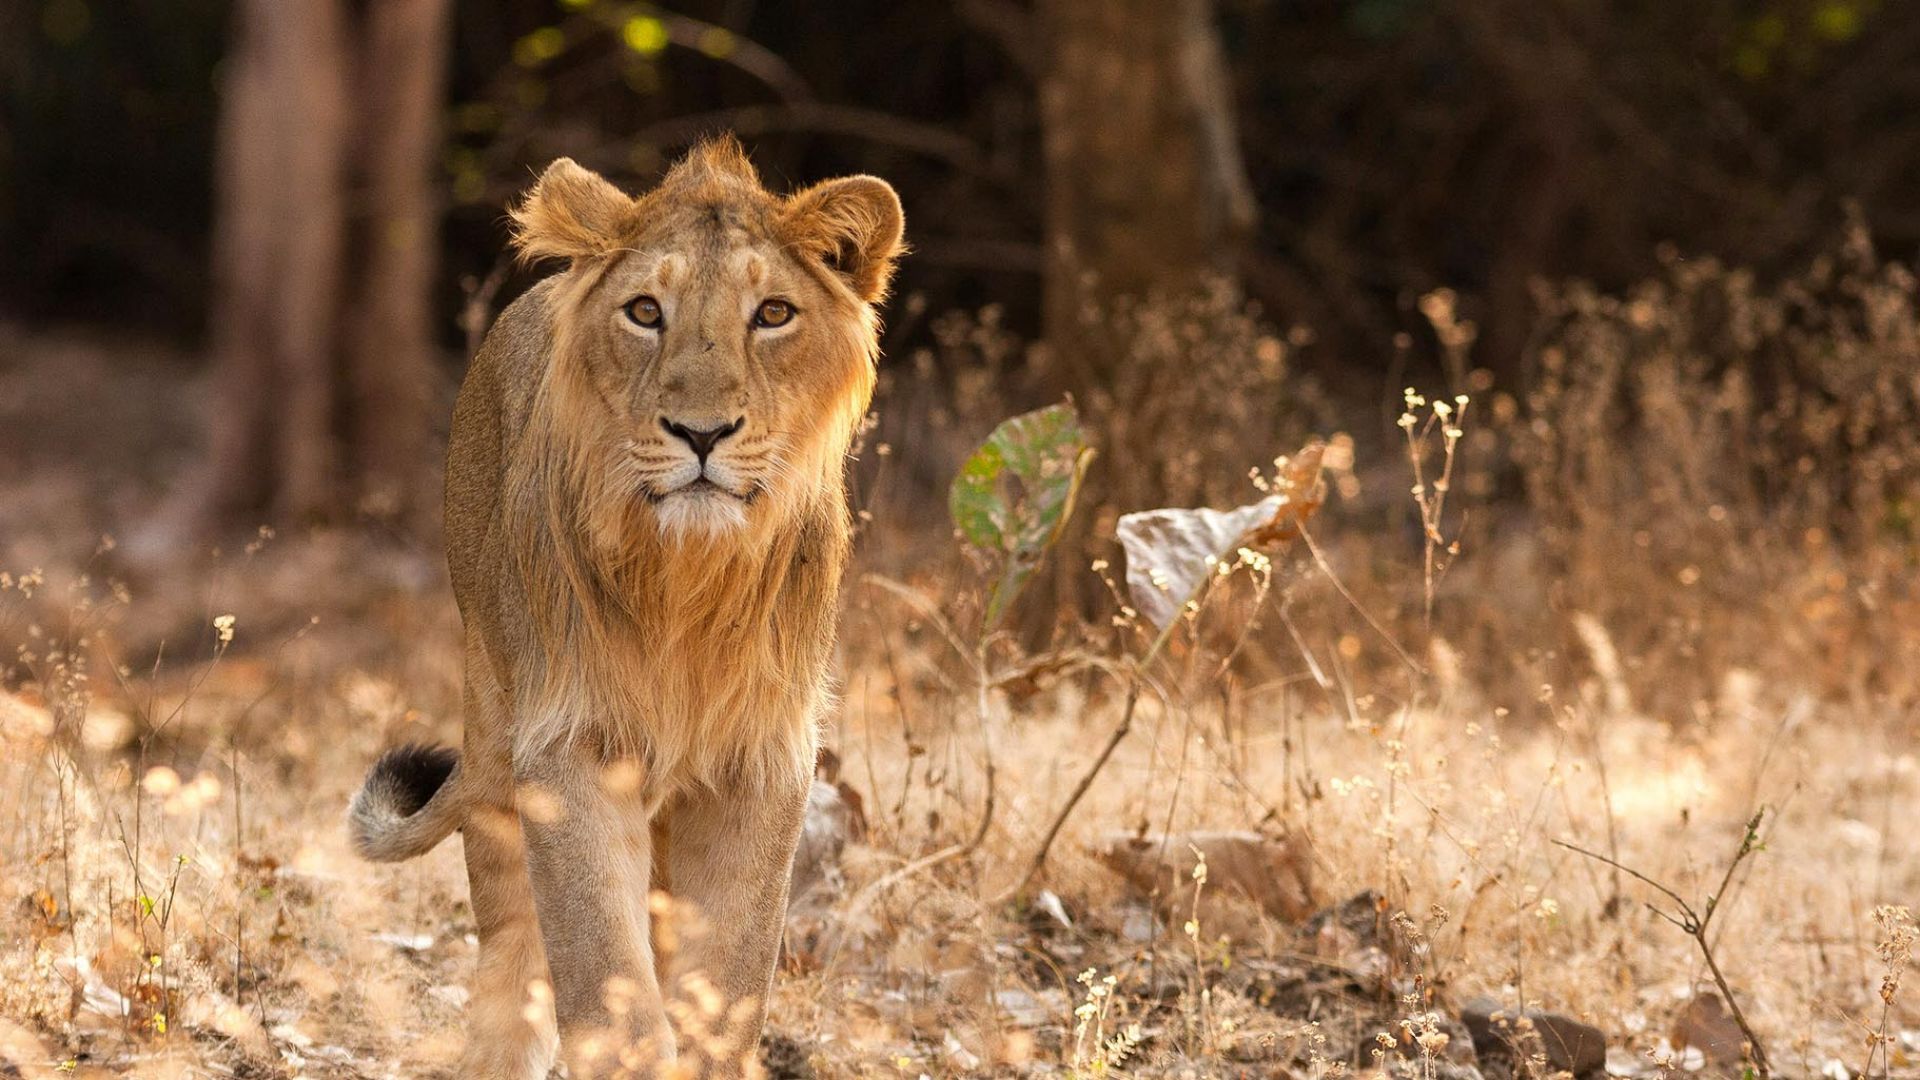 Sight of Lions in Gir 